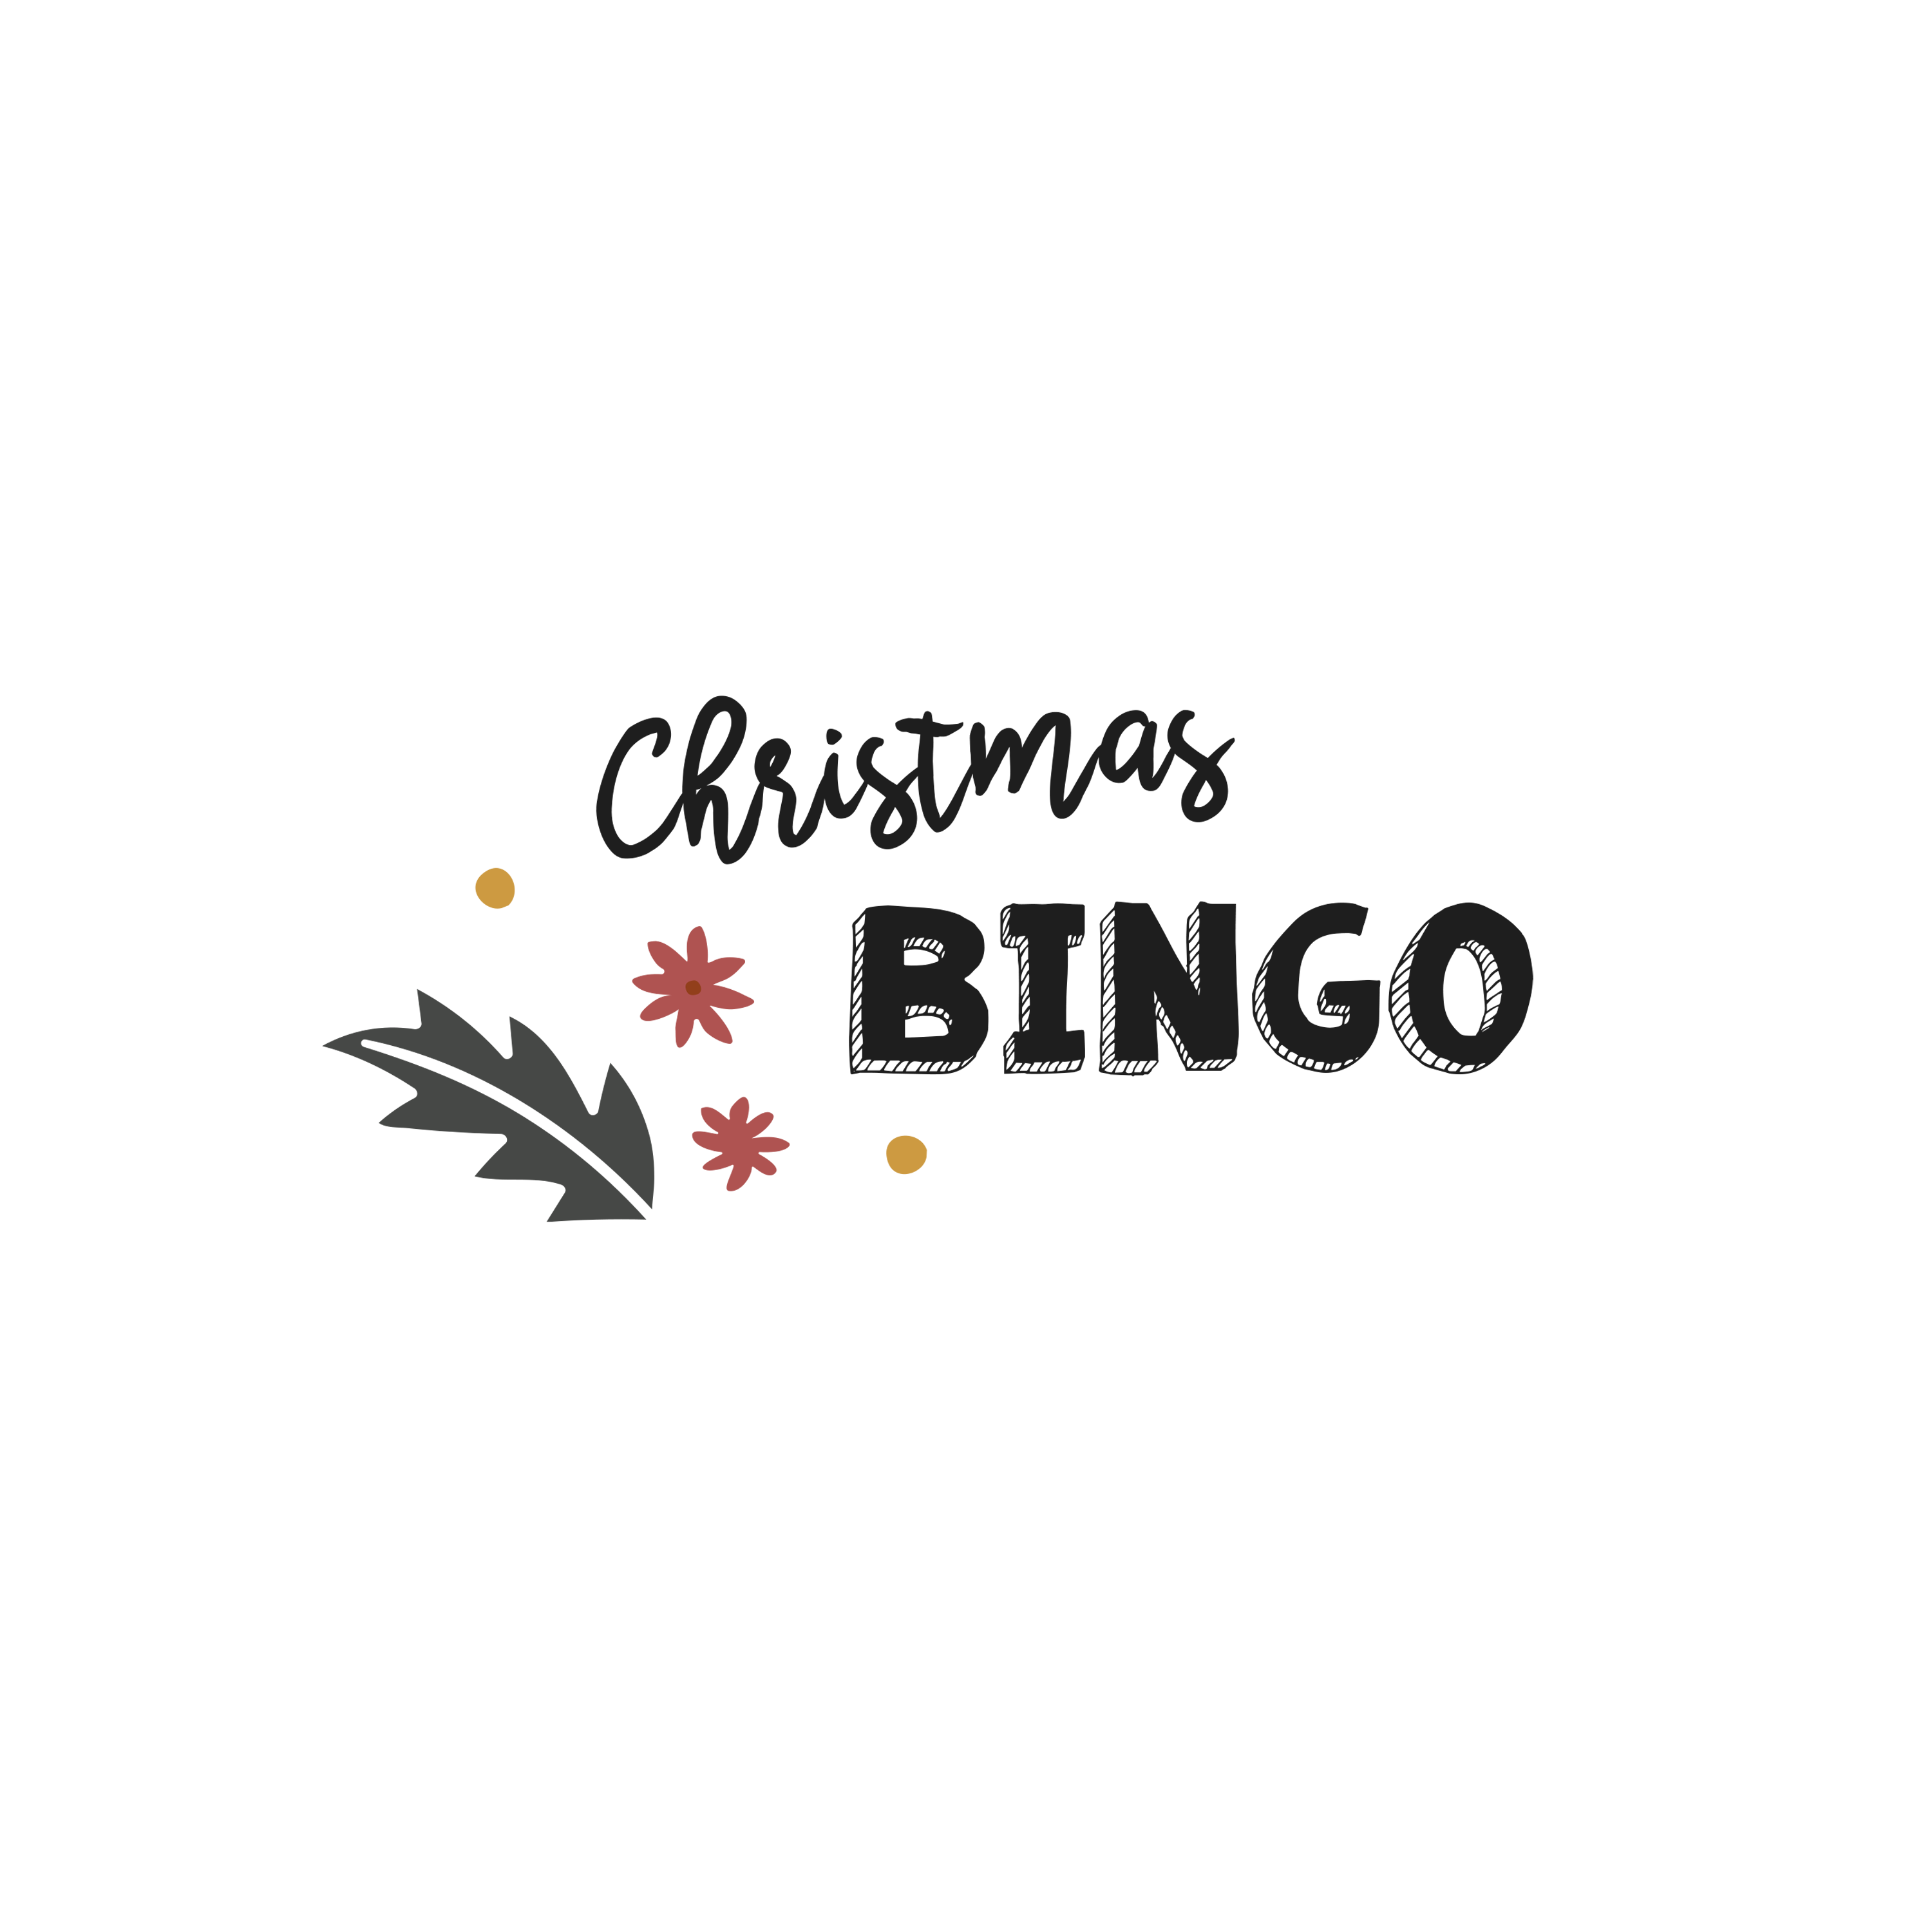 English version of the logo of the christmas Bingo made by Les Belles Combines